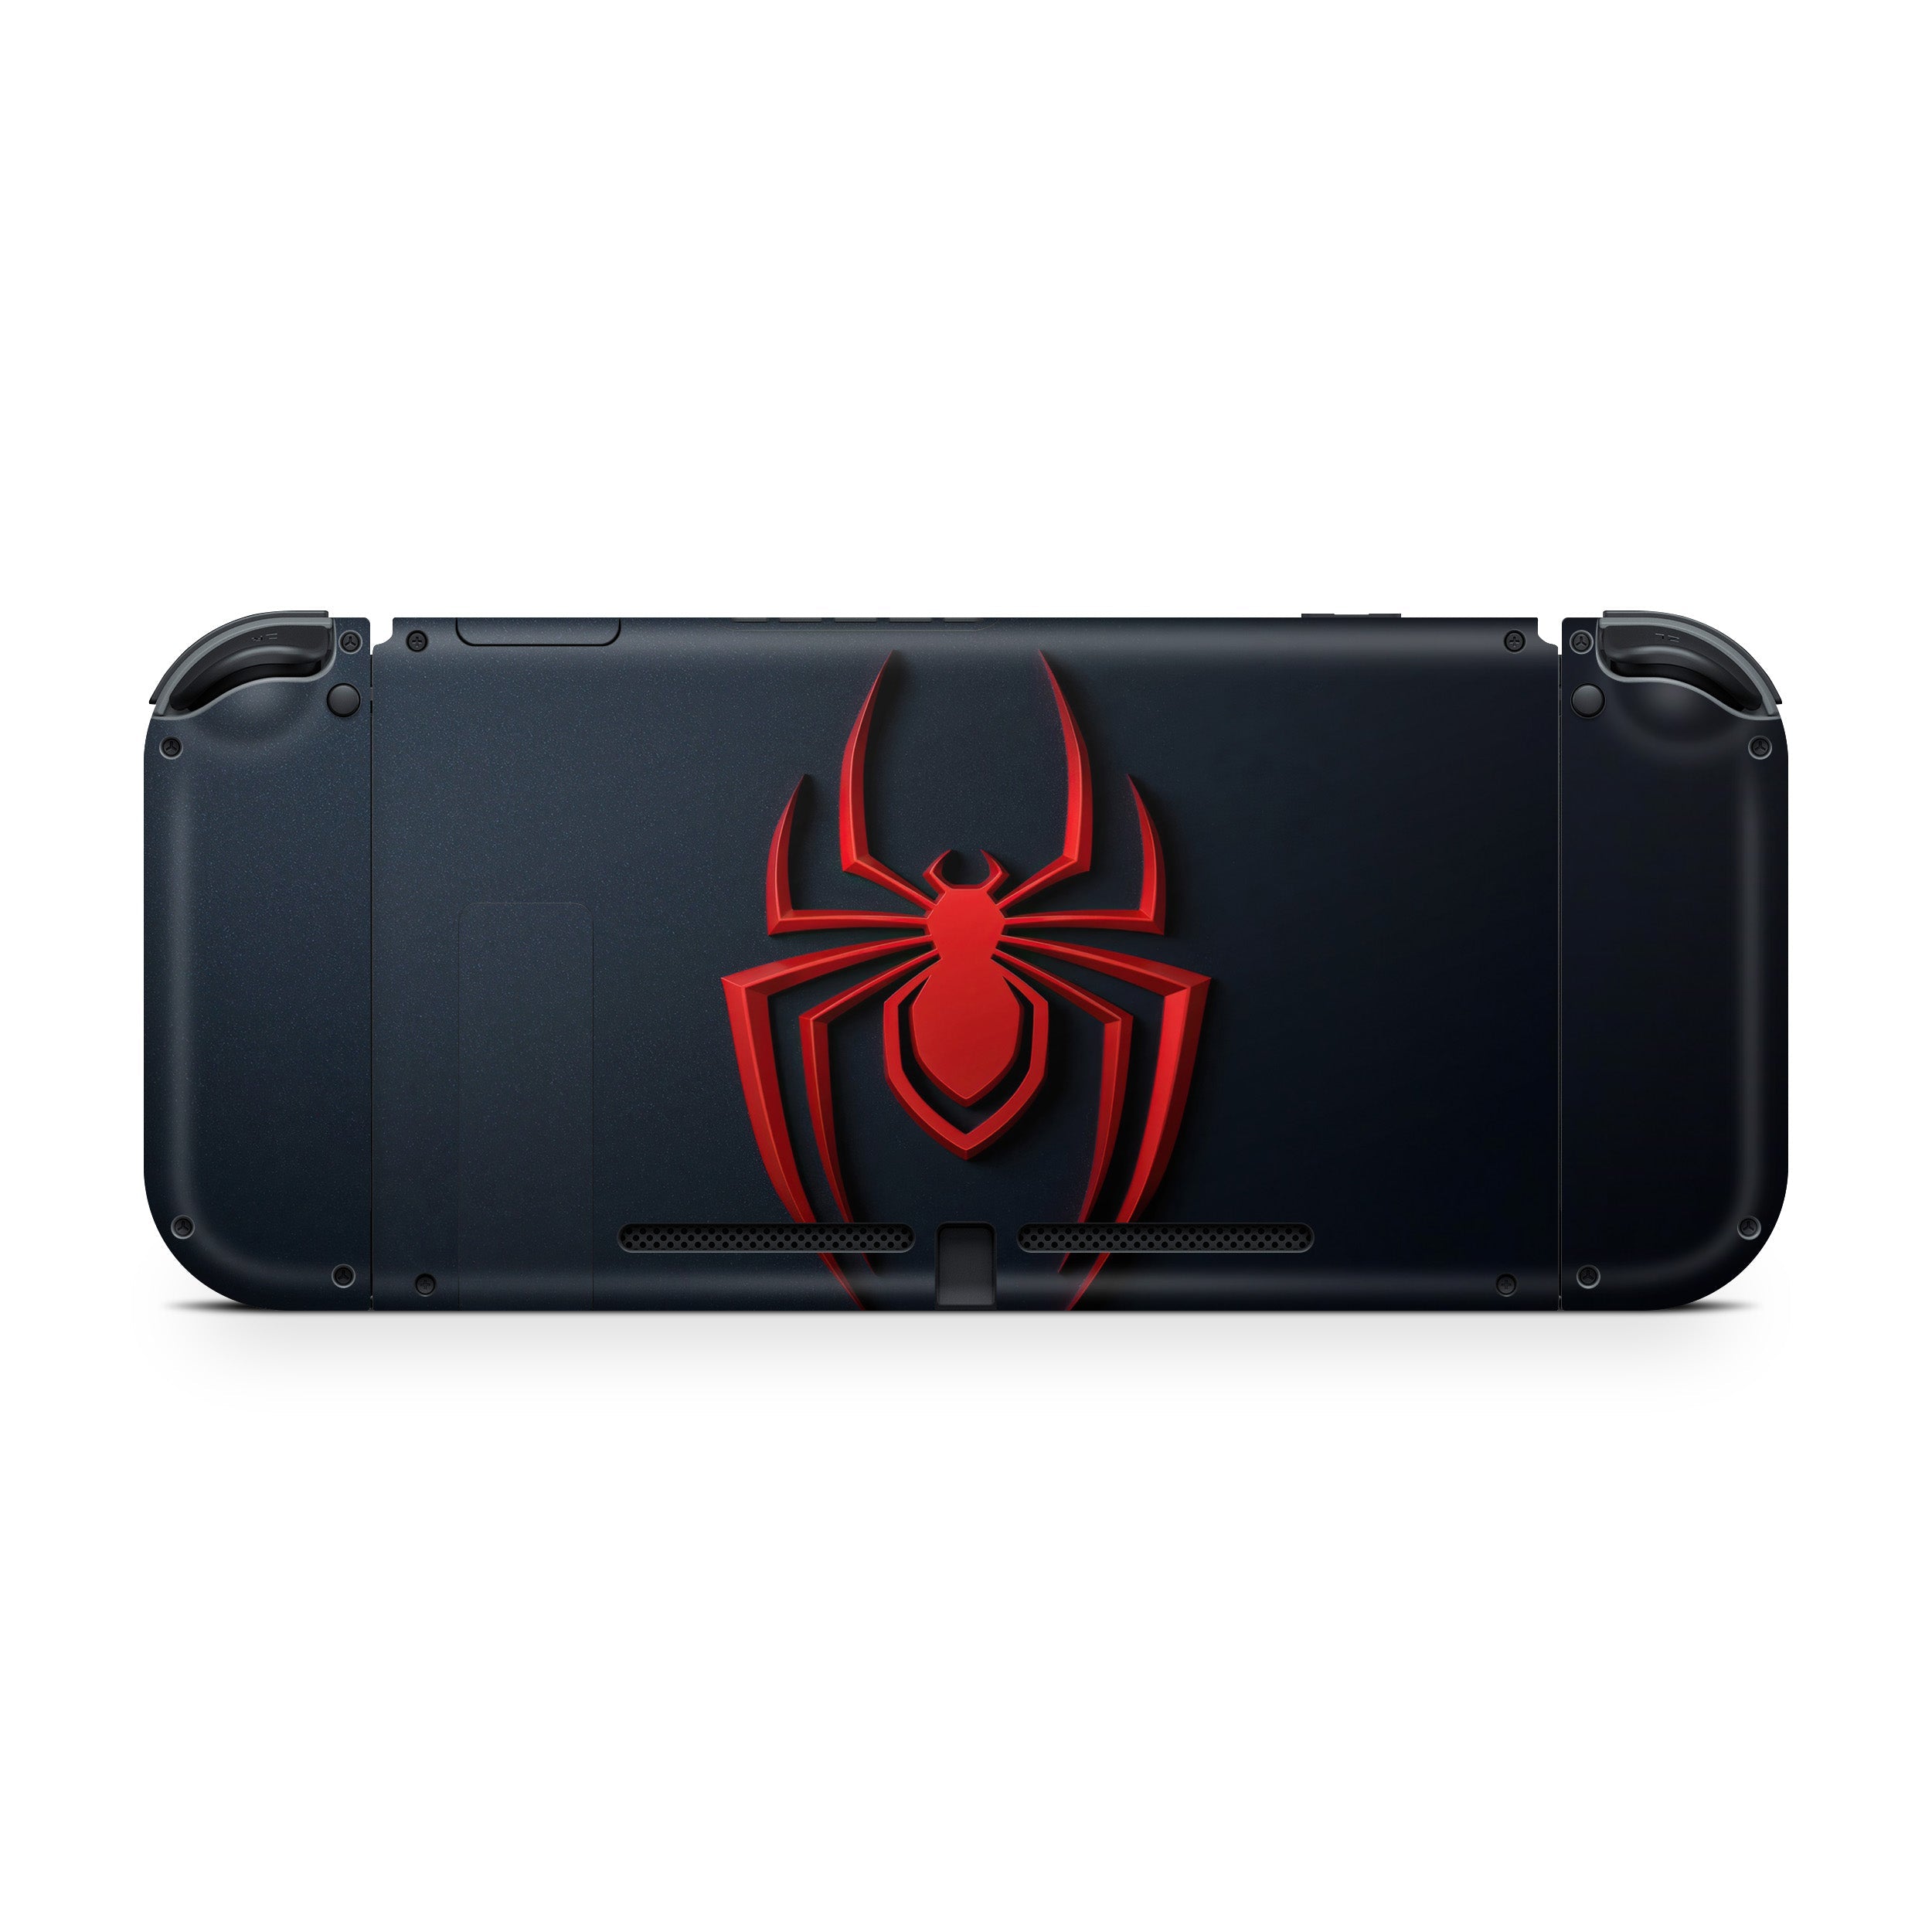 A video game skin featuring a Marvel Spiderman Miles Morales design for the Nintendo Switch.